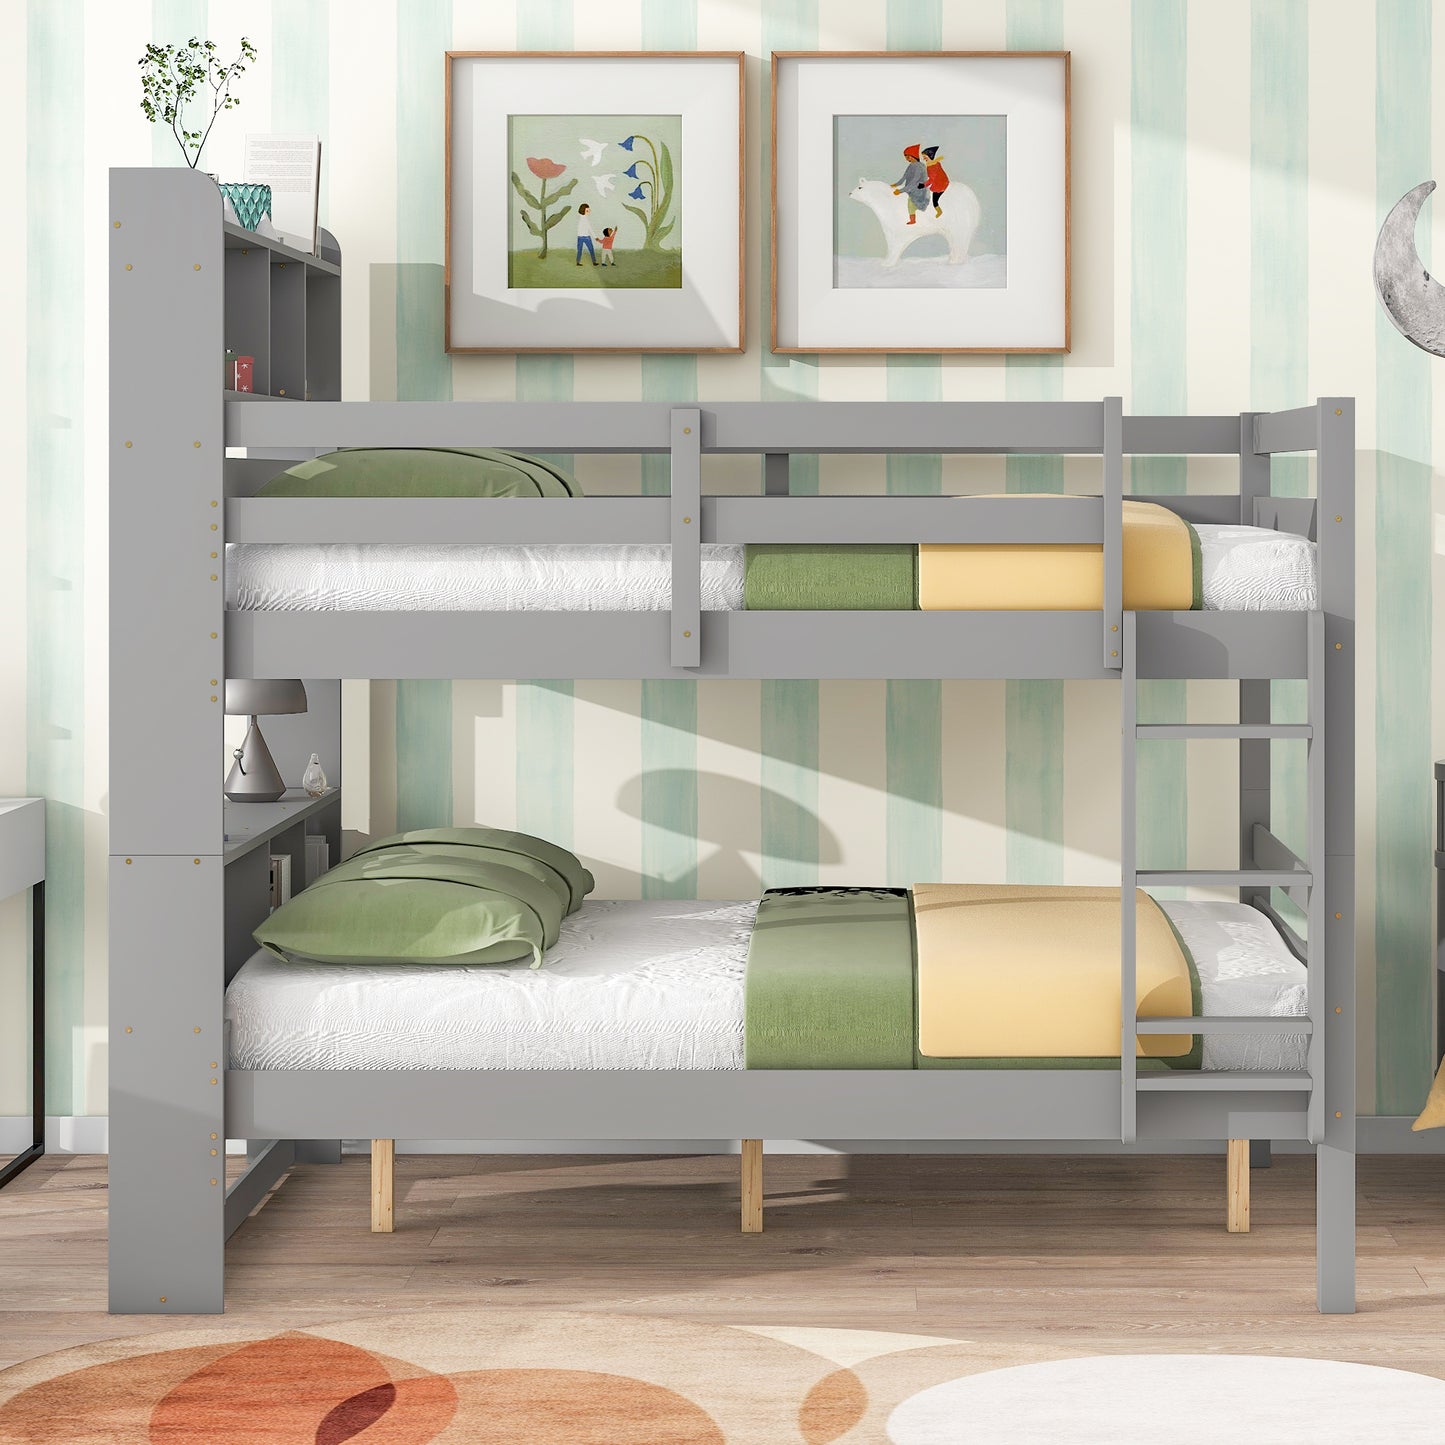 Liyarya Wood Bed  Full Over Full Bunk Beds with Bookcase Headboard, Solid Wood Bed Frame with Safety Rail and Ladder, Kids/Teens Bedroom, Guest Room Furniture, Can Be converted into 2 Beds, Grey